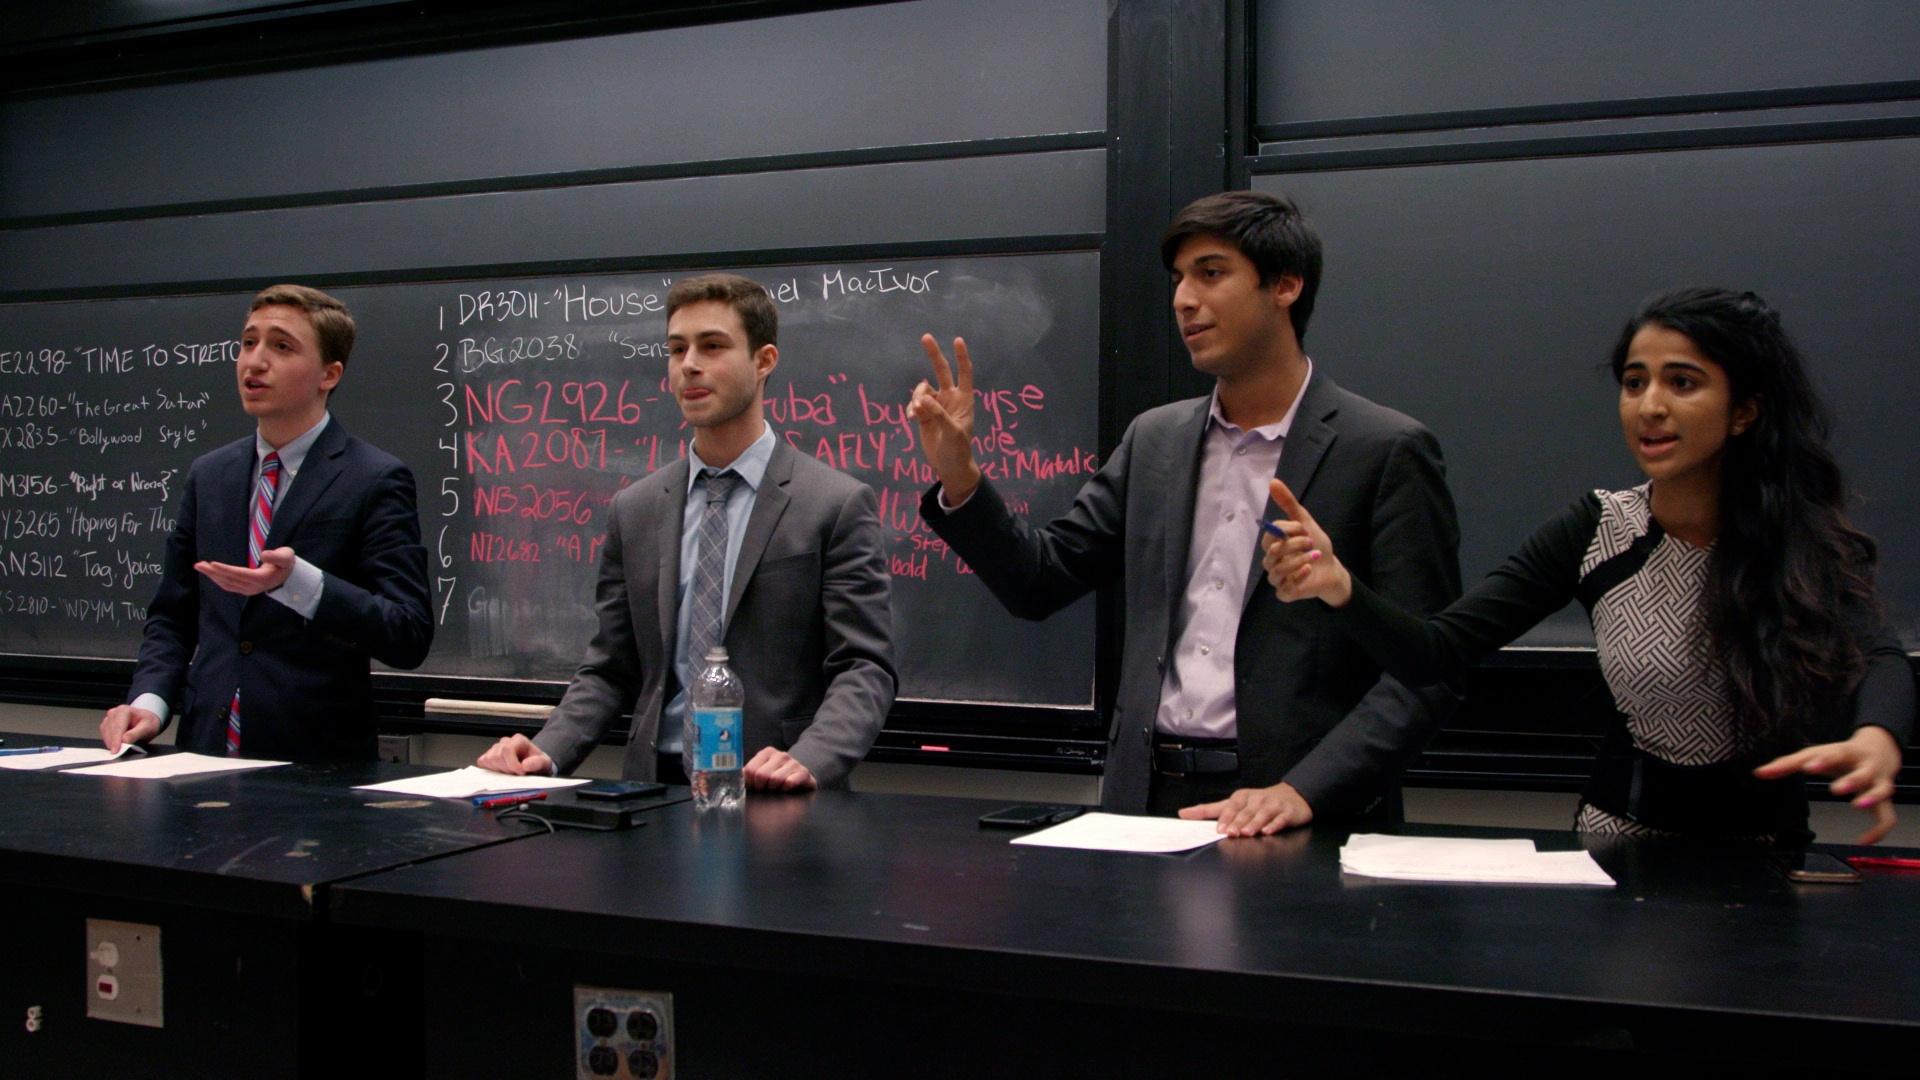 Anika and Jay stand alongside their two opponents during a final round of a competitive debate.